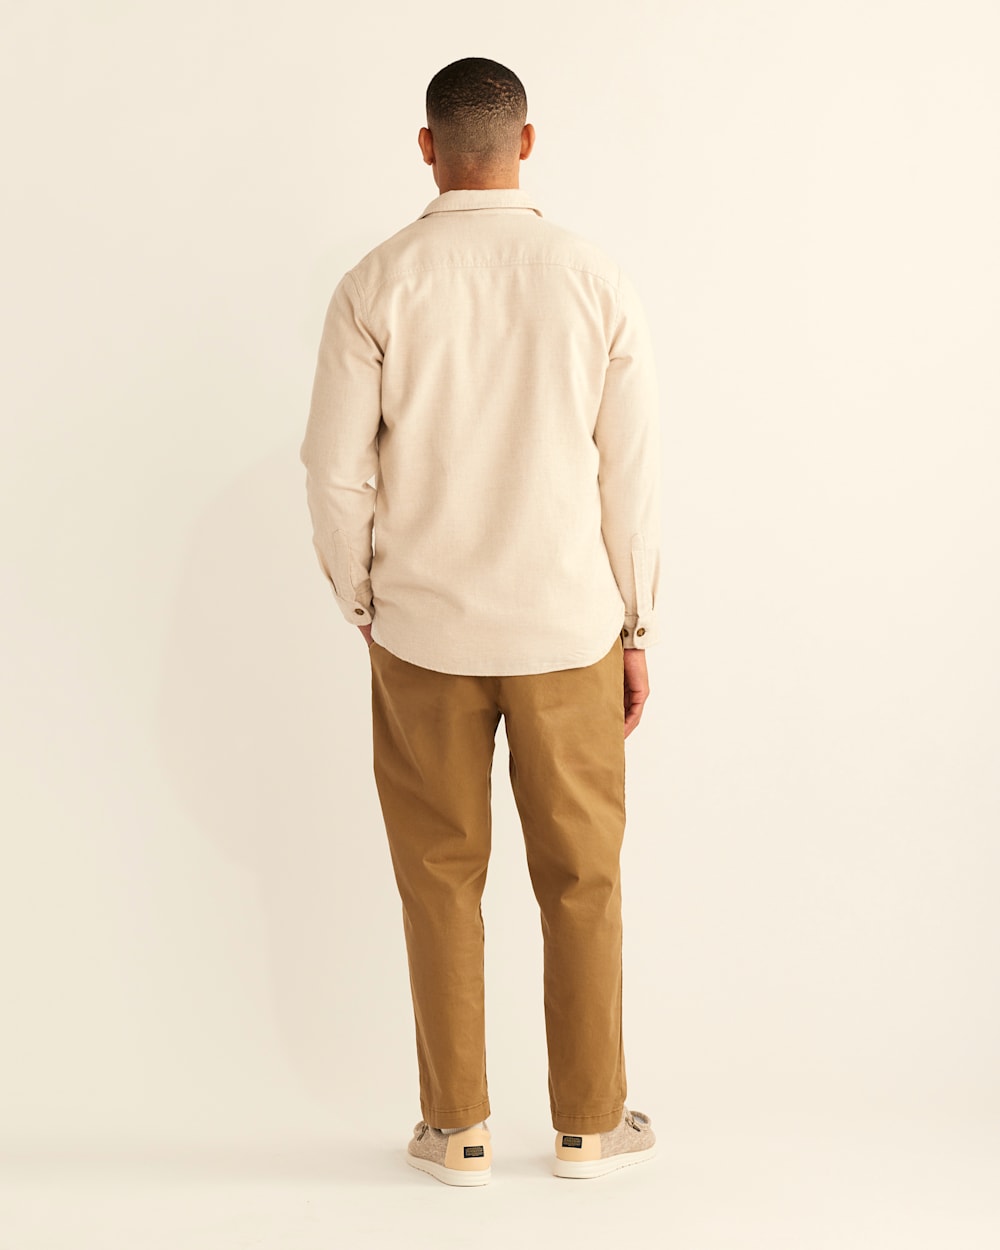 ALTERNATE VIEW OF MEN'S BURNSIDE DOUBLE-BRUSHED FLANNEL SHIRT IN SAND HEATHER image number 3